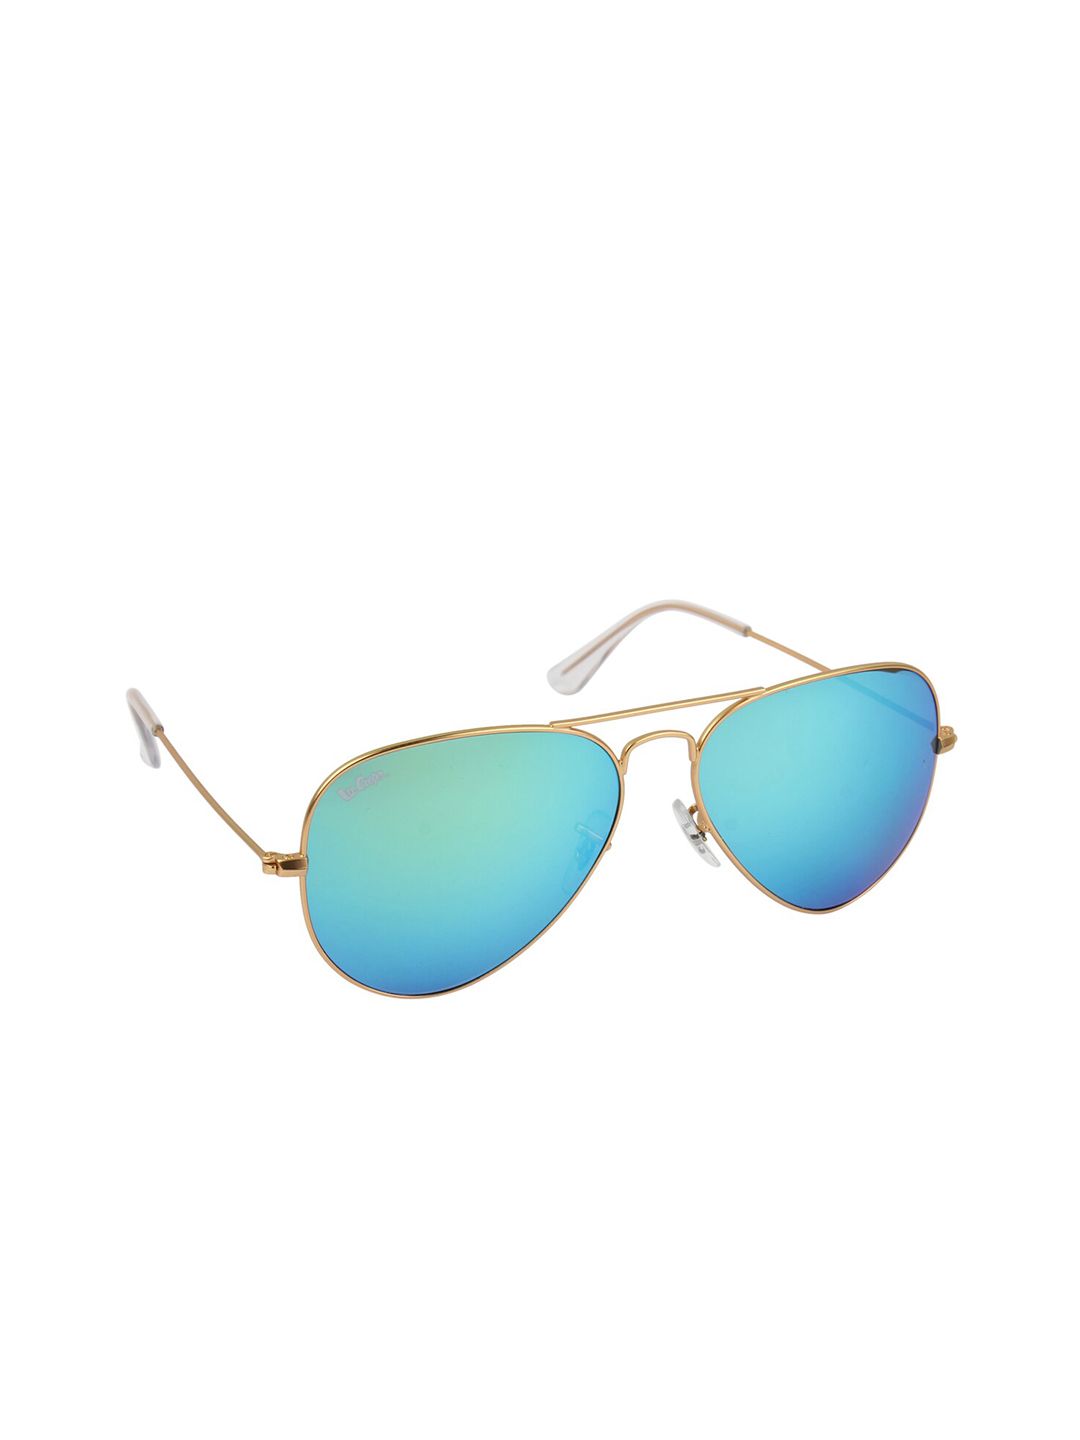 Lee Cooper Unisex Gold Toned Lens Aviator Sunglasses with UV Protected Lens LCO9000FOA C23 Price in India